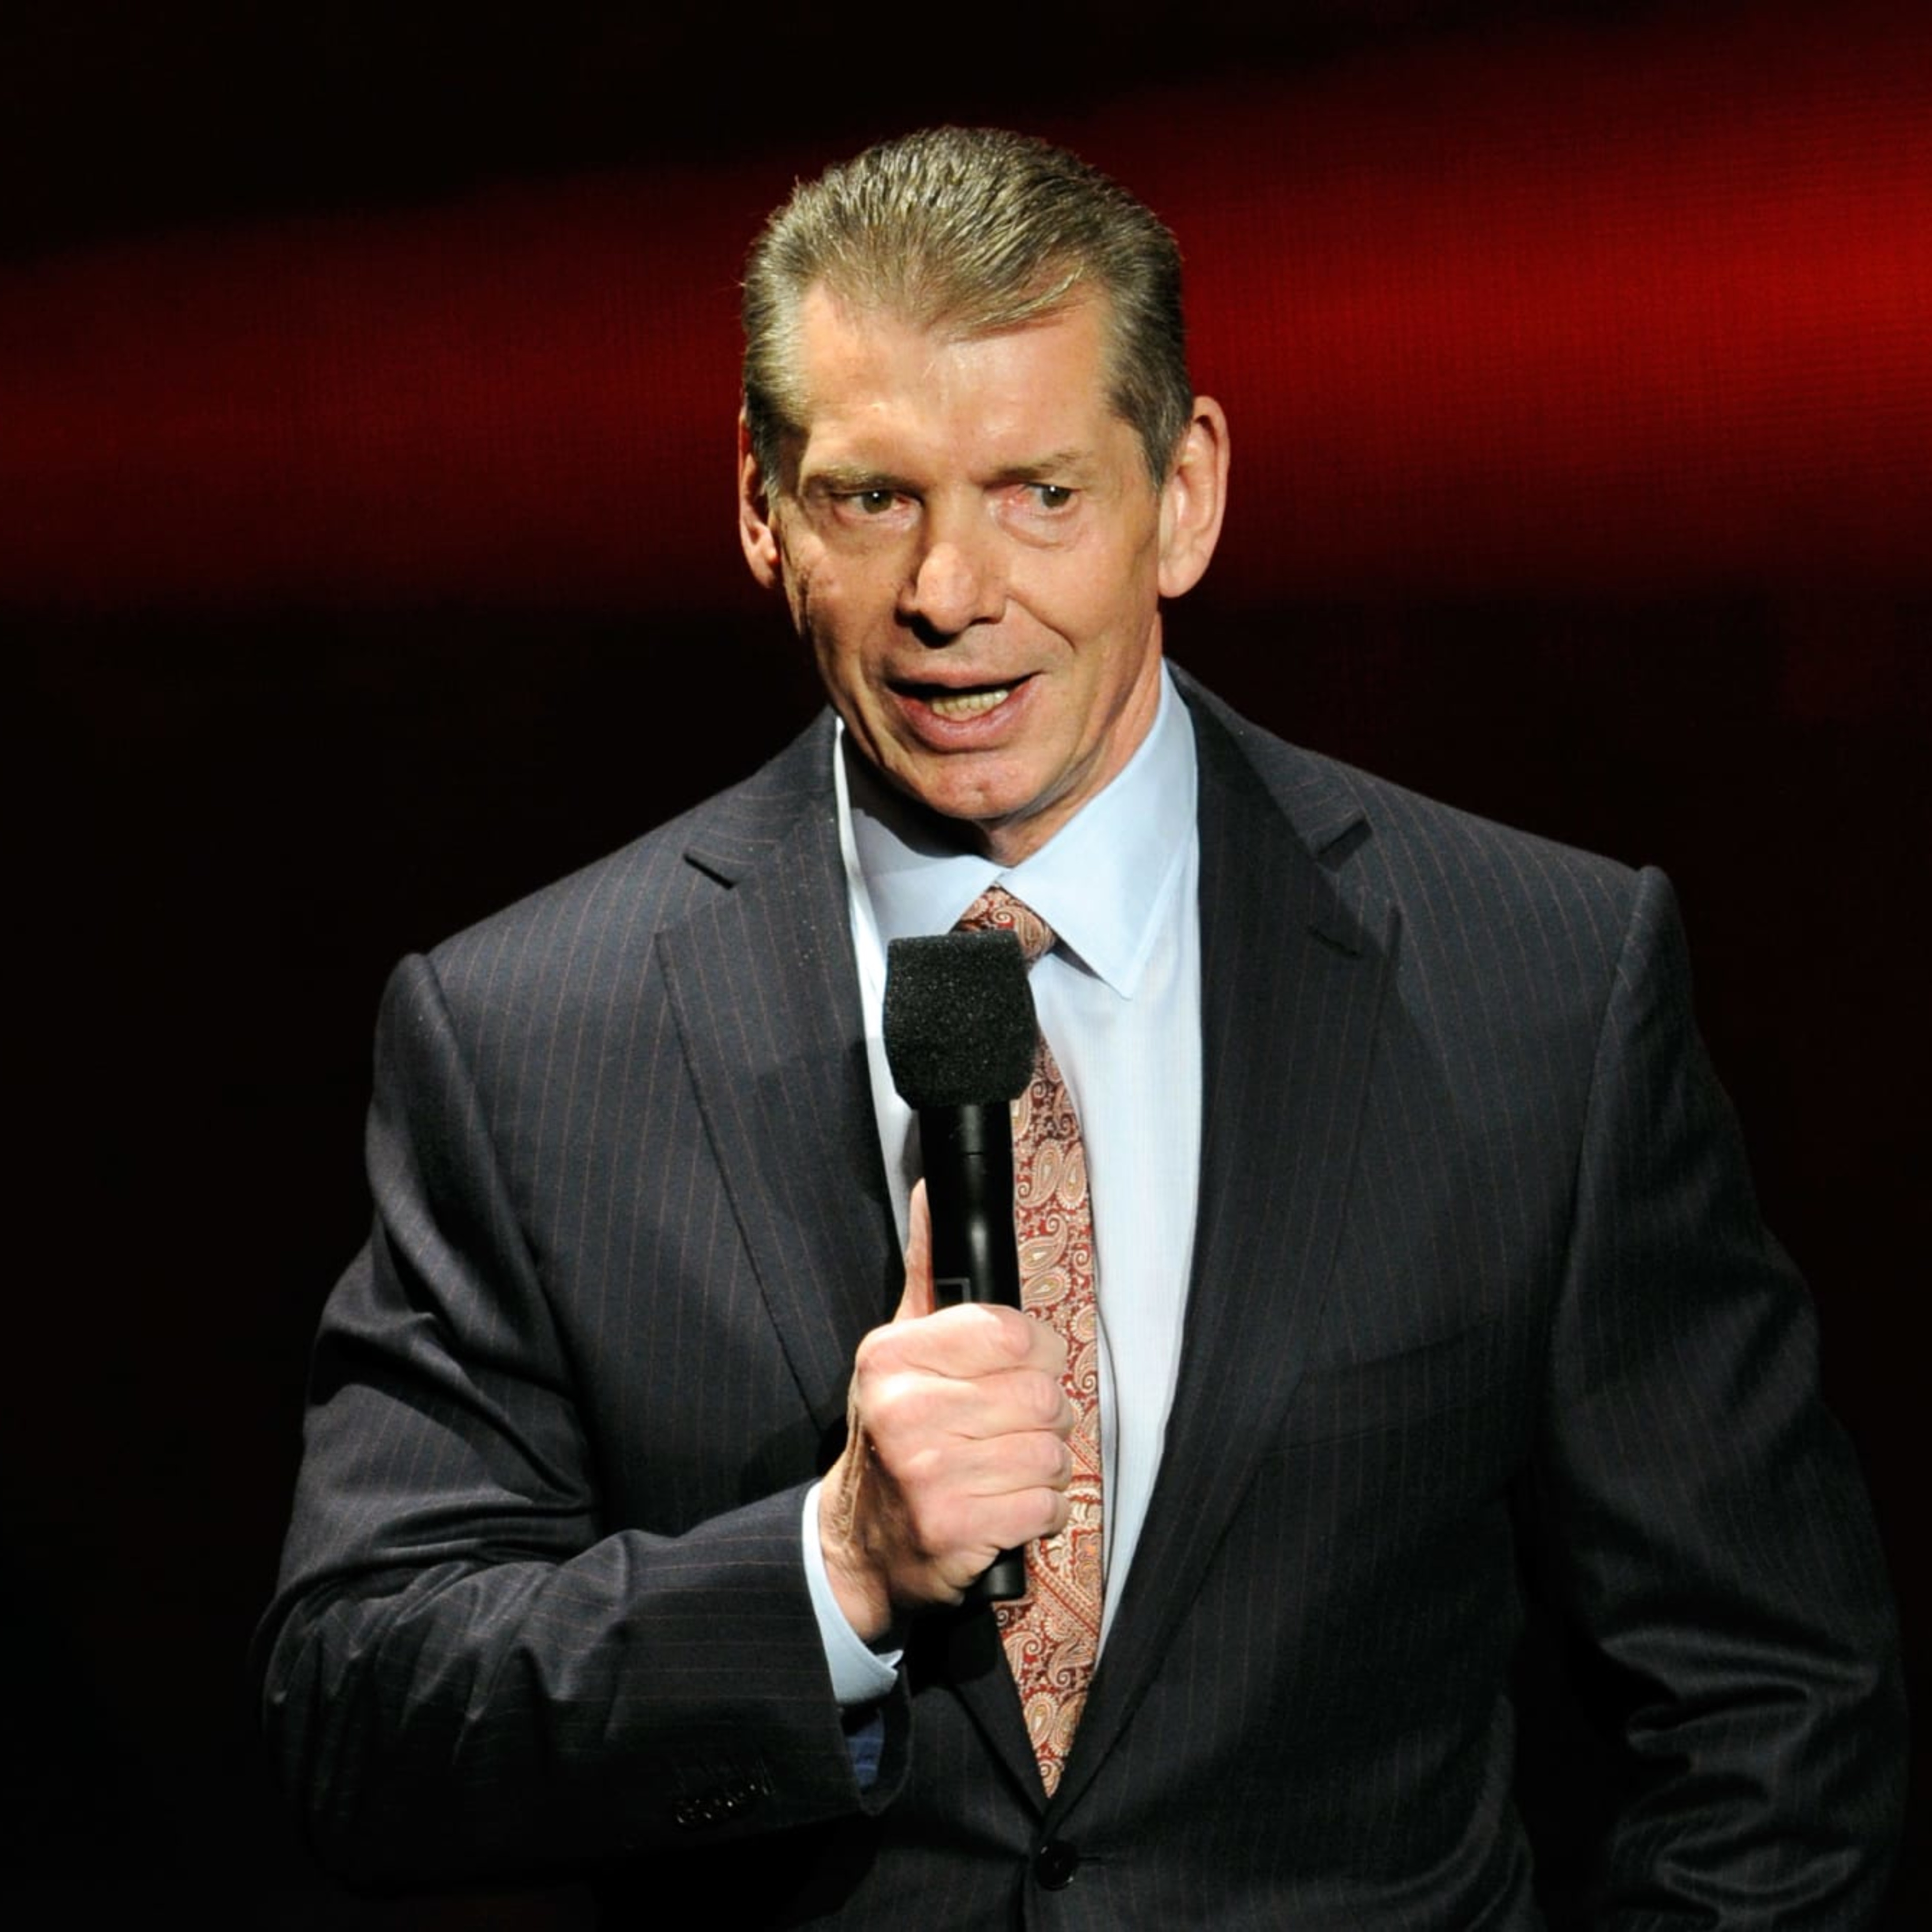 Vince McMahon Announces Retirement from WWE amid Sexual Misconduct Allegations